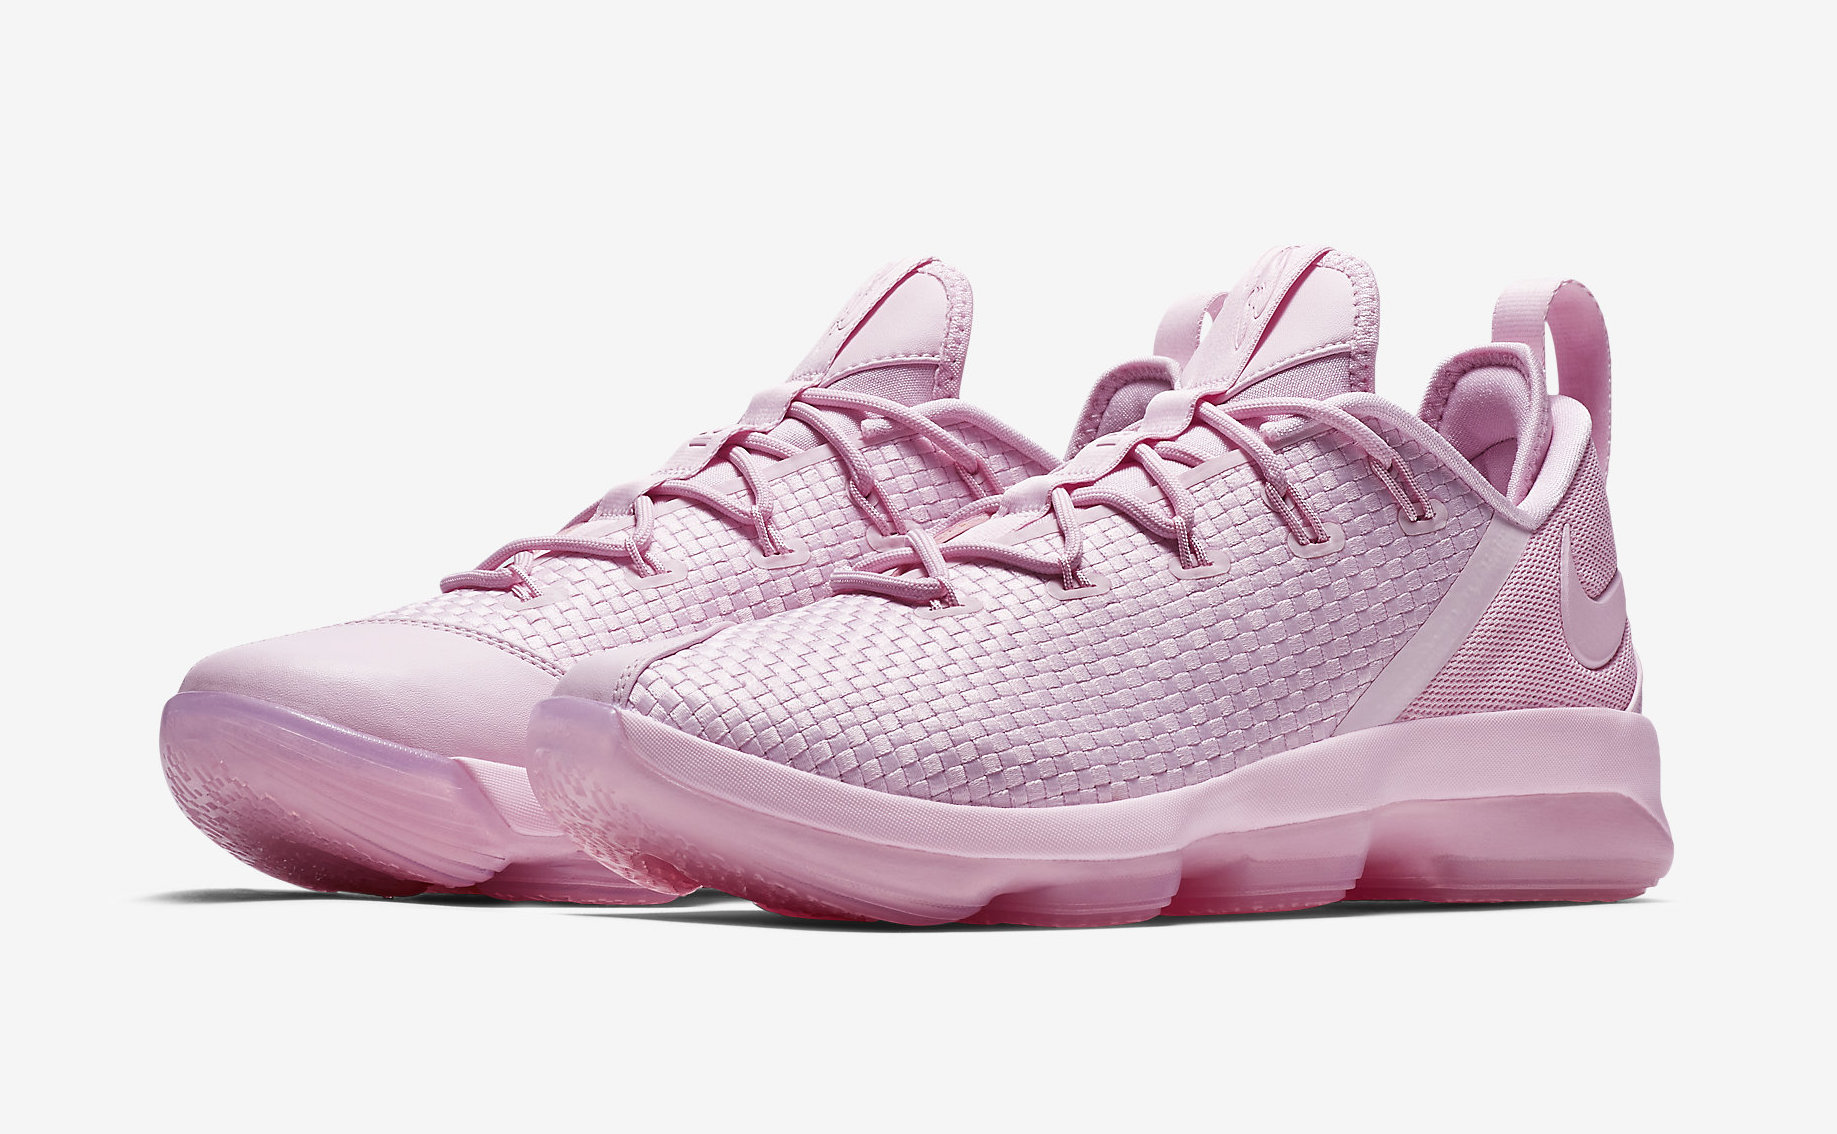 lebron shoes pink